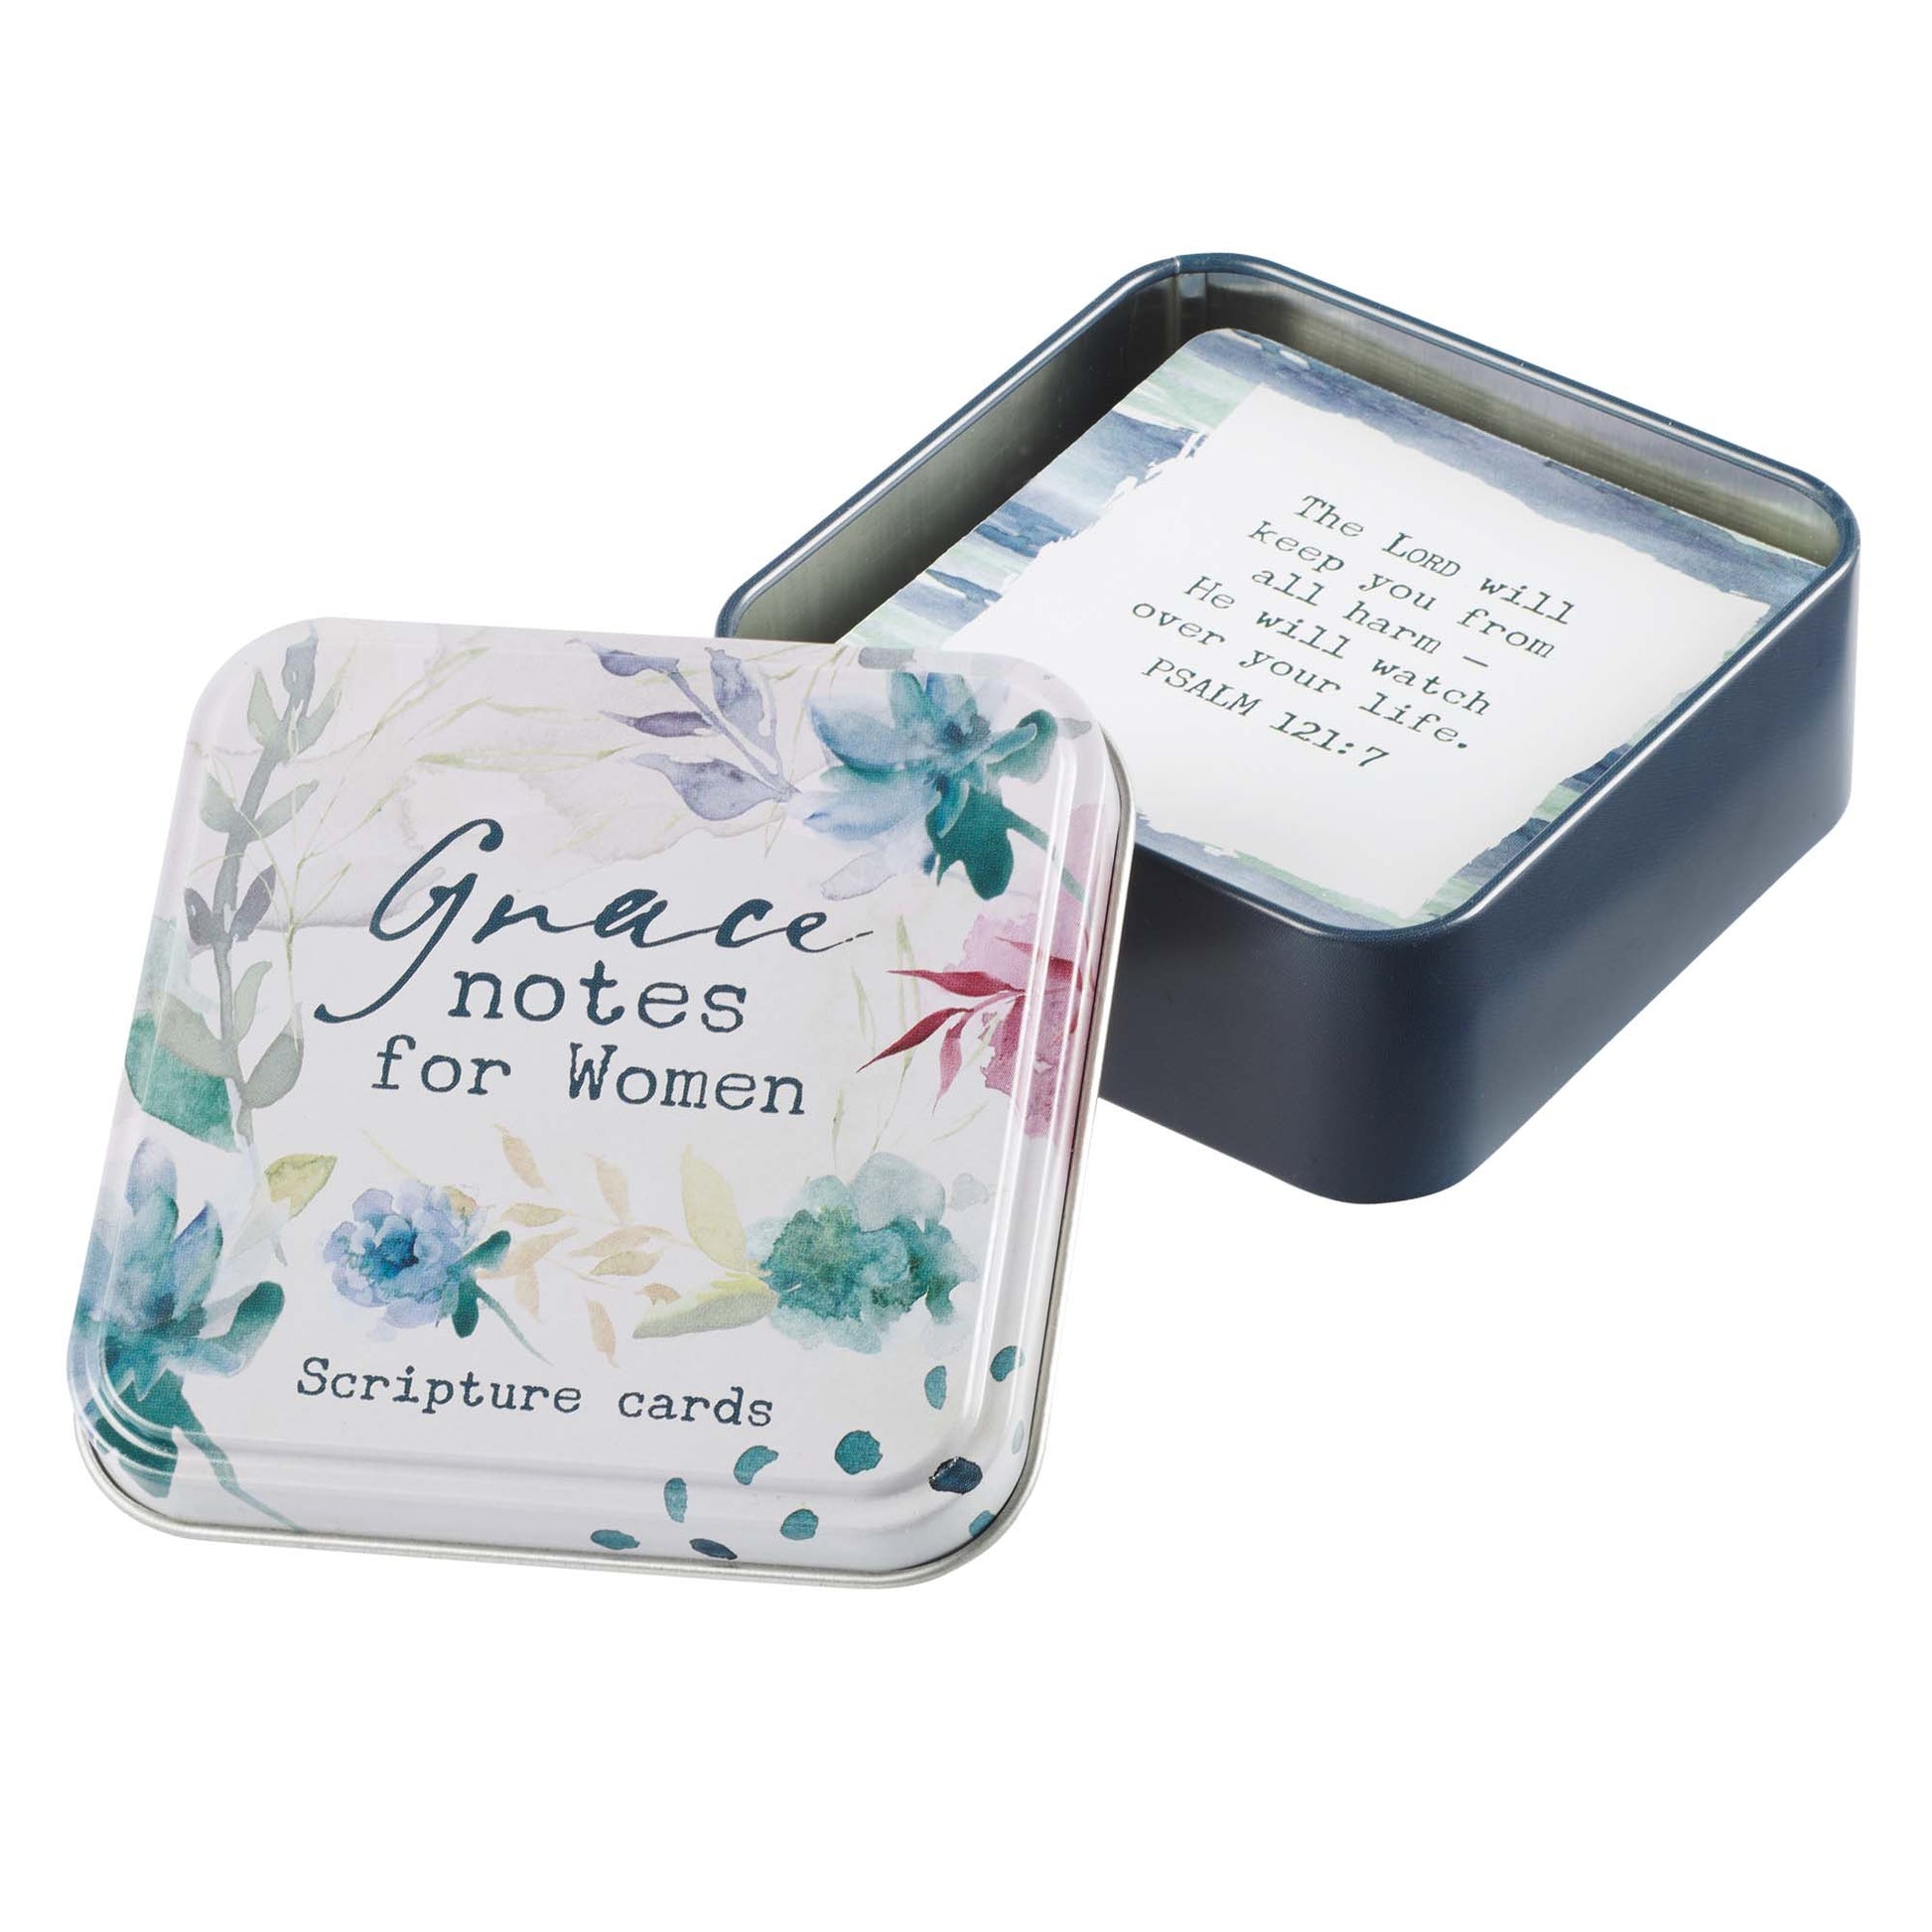 GraceNotes for Women Scripture Cards - The Christian Gift Company